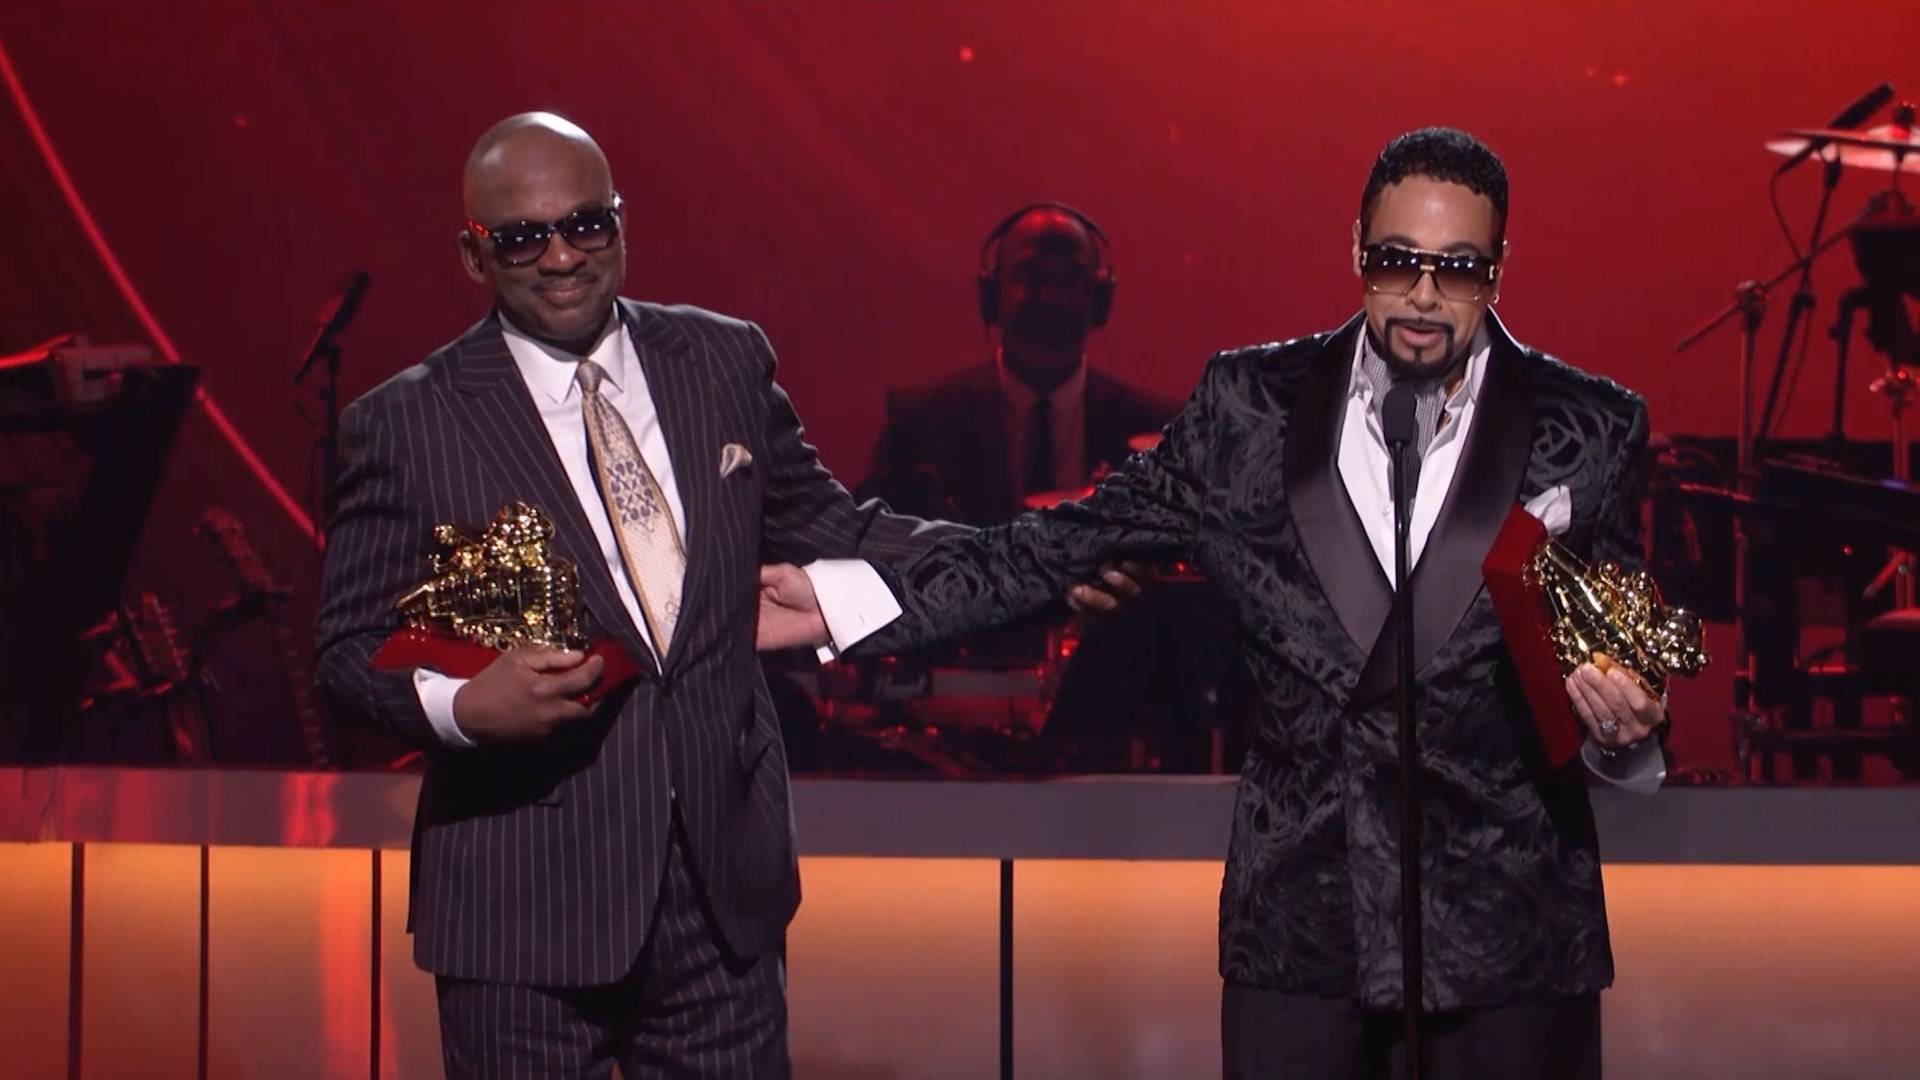 Morris Day and The Time take the BET Soul Train Awards 2022 stage to accept the Legend Award.